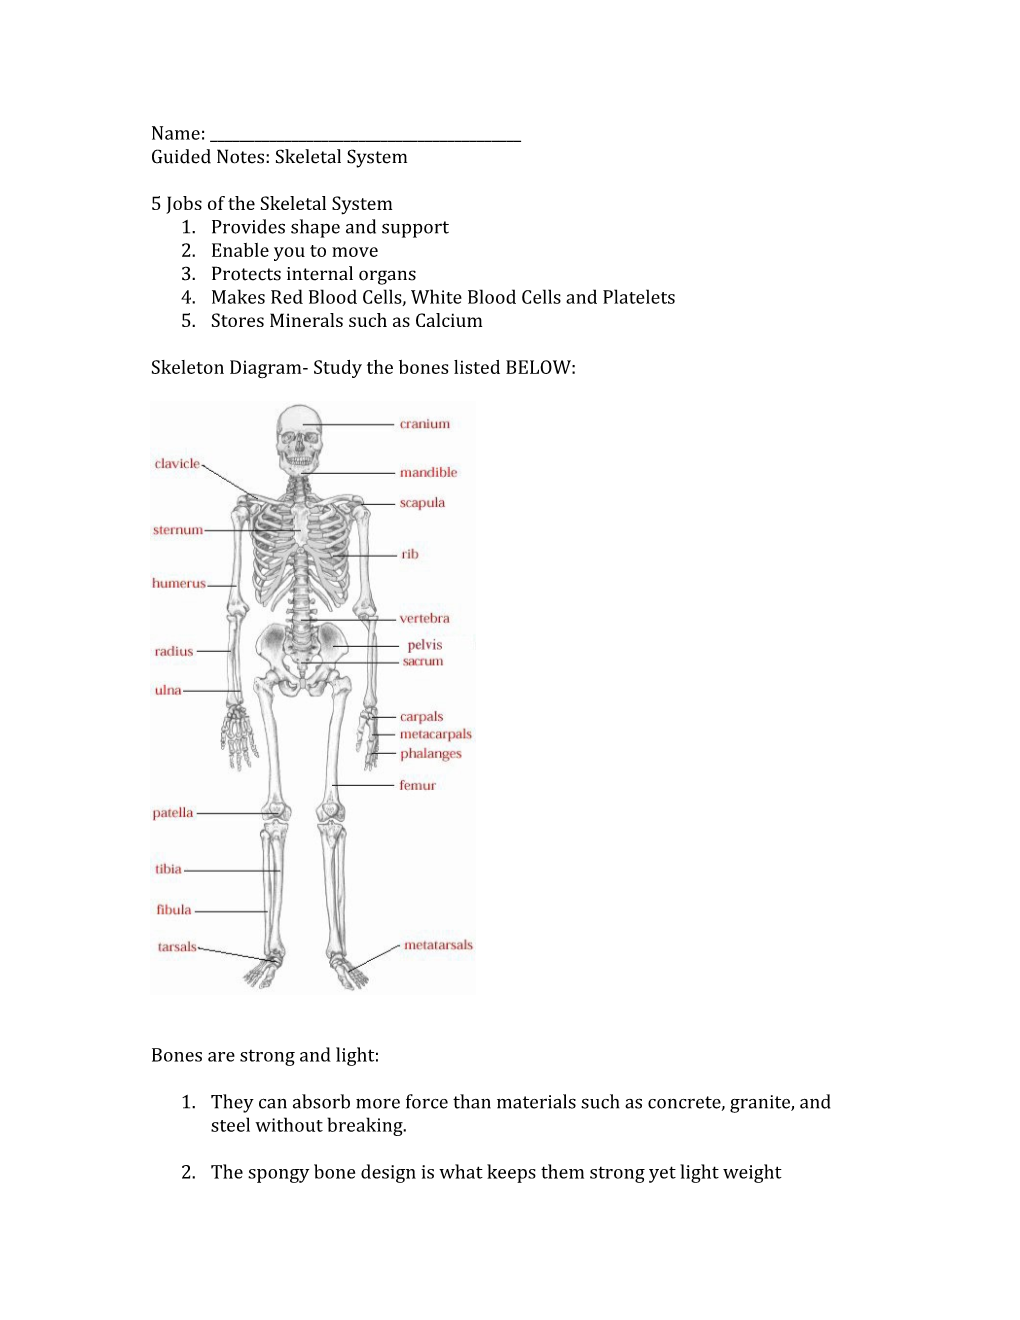 Guided Notes: Skeletal System